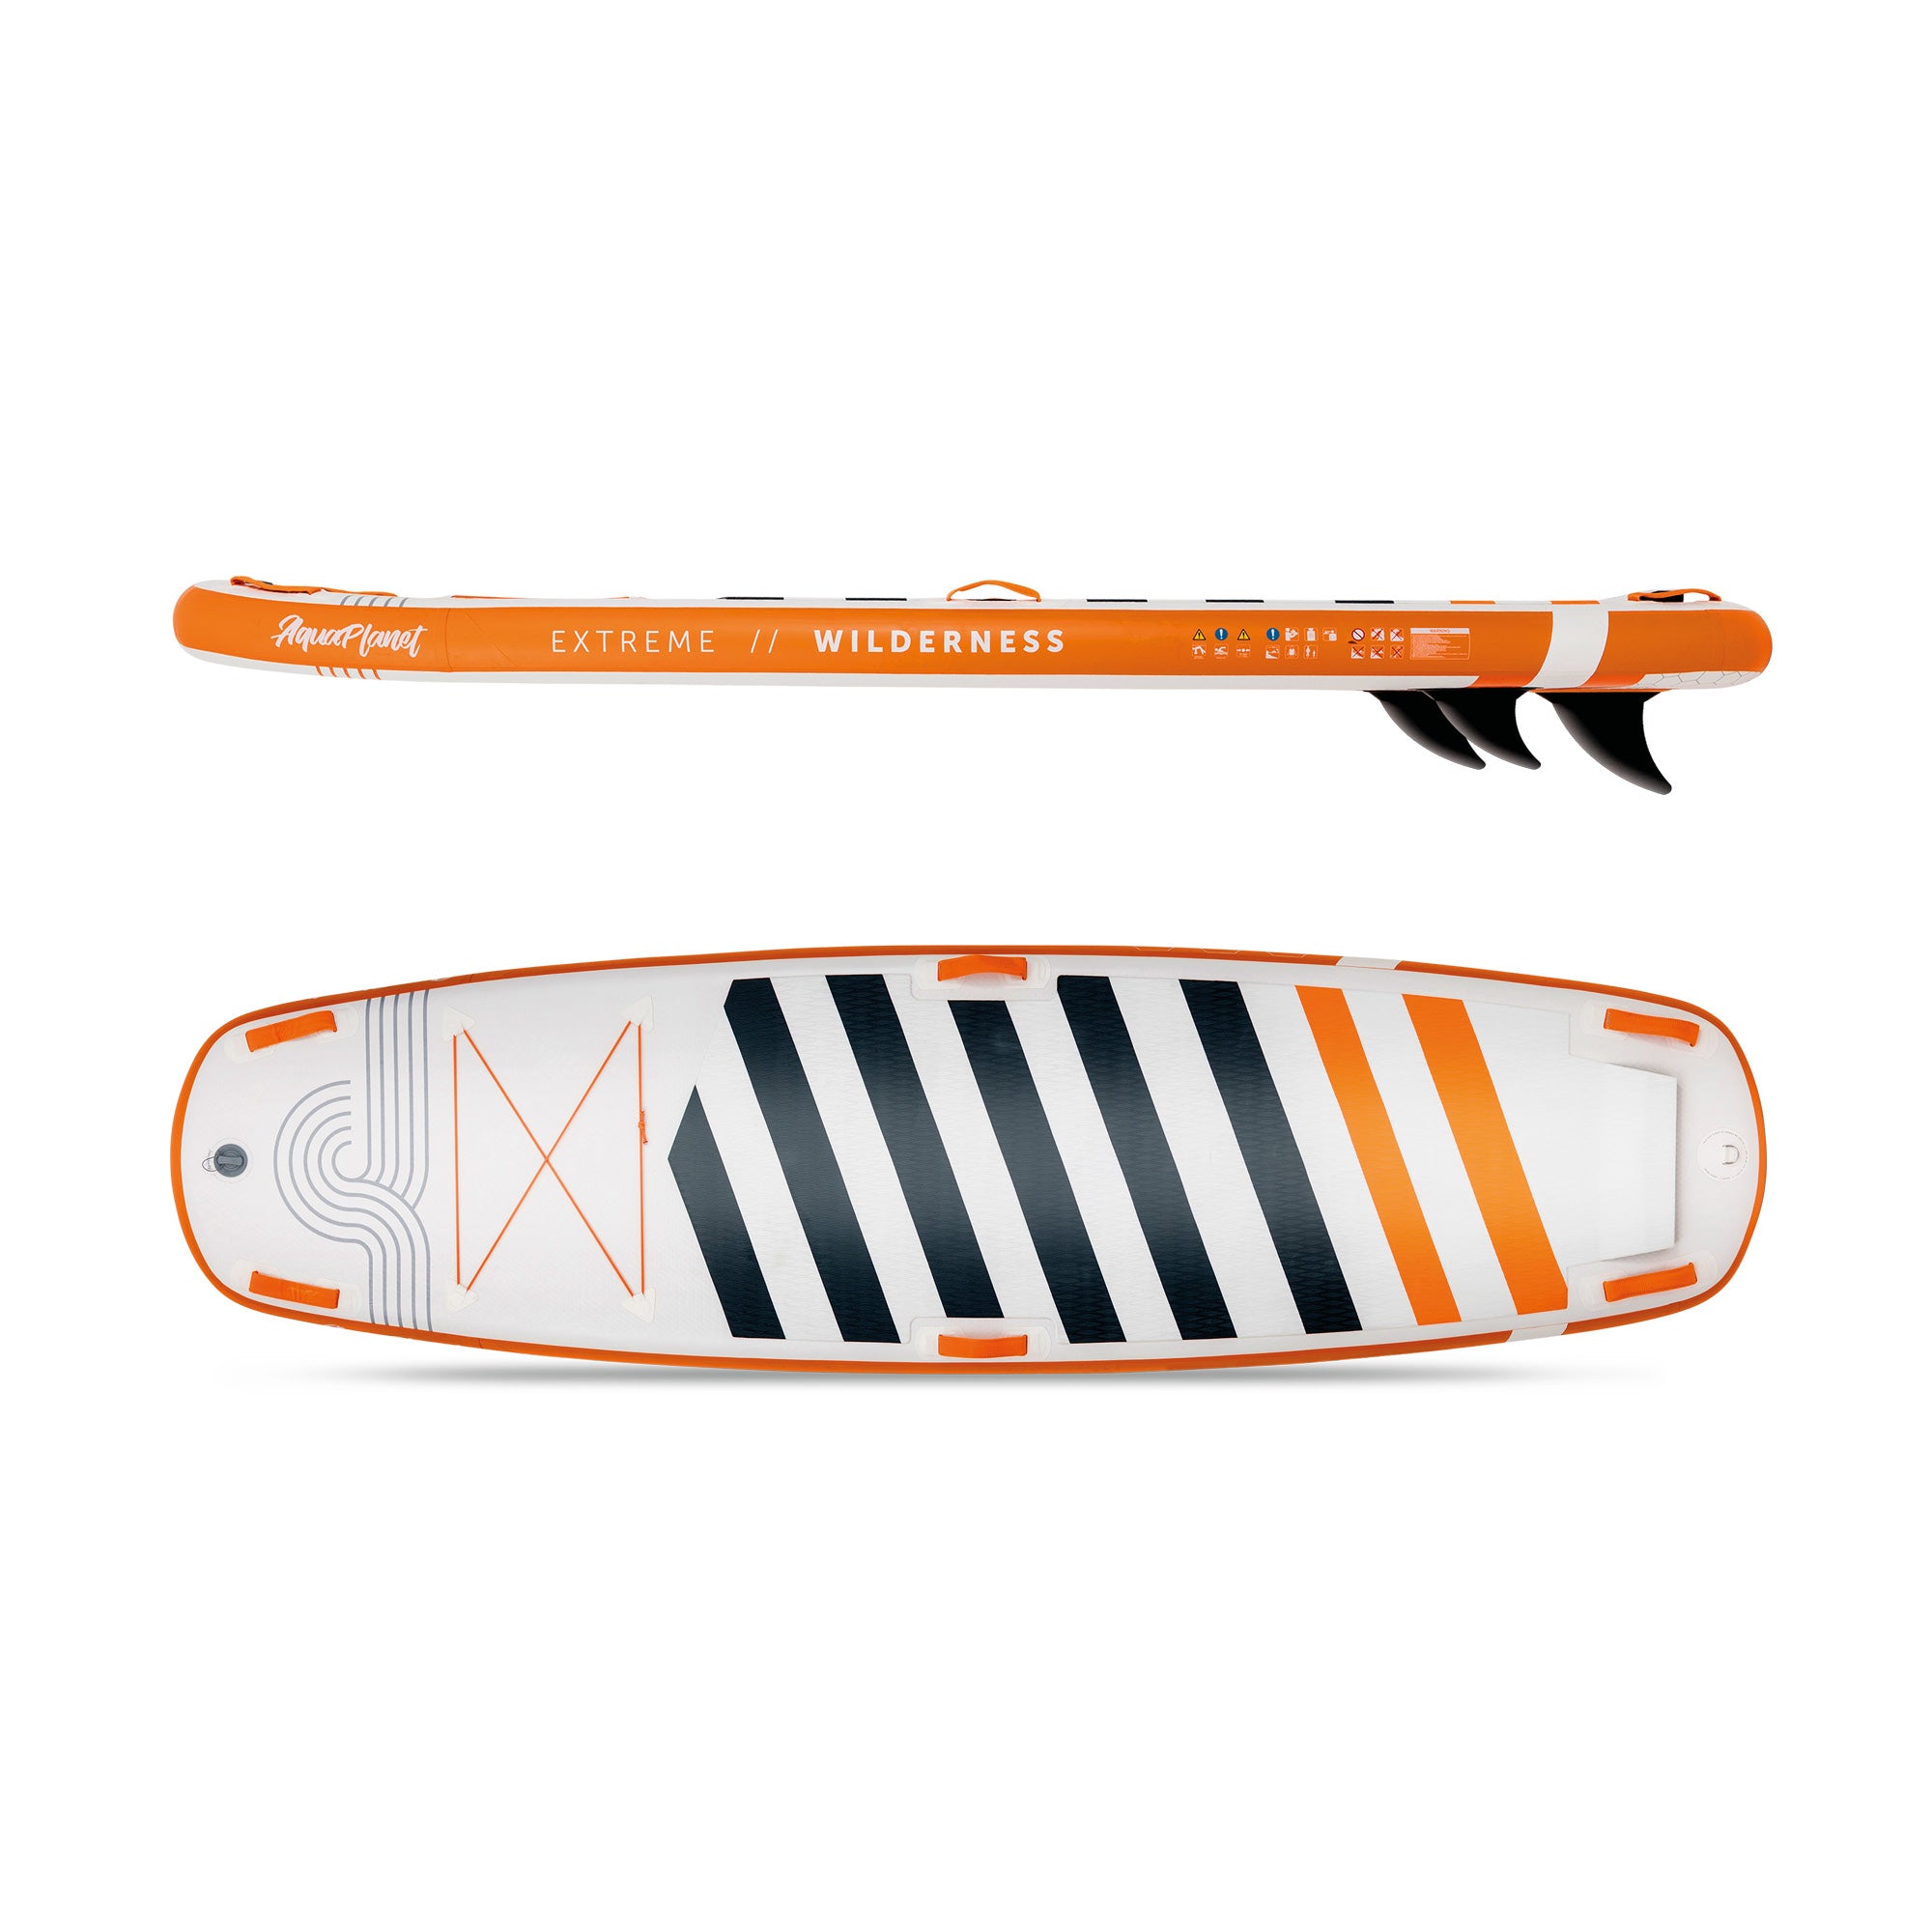 Top View and Side View of the AquaPlanet Wilderness 10' iSUP Inflatable Stand Up Paddleboard Set